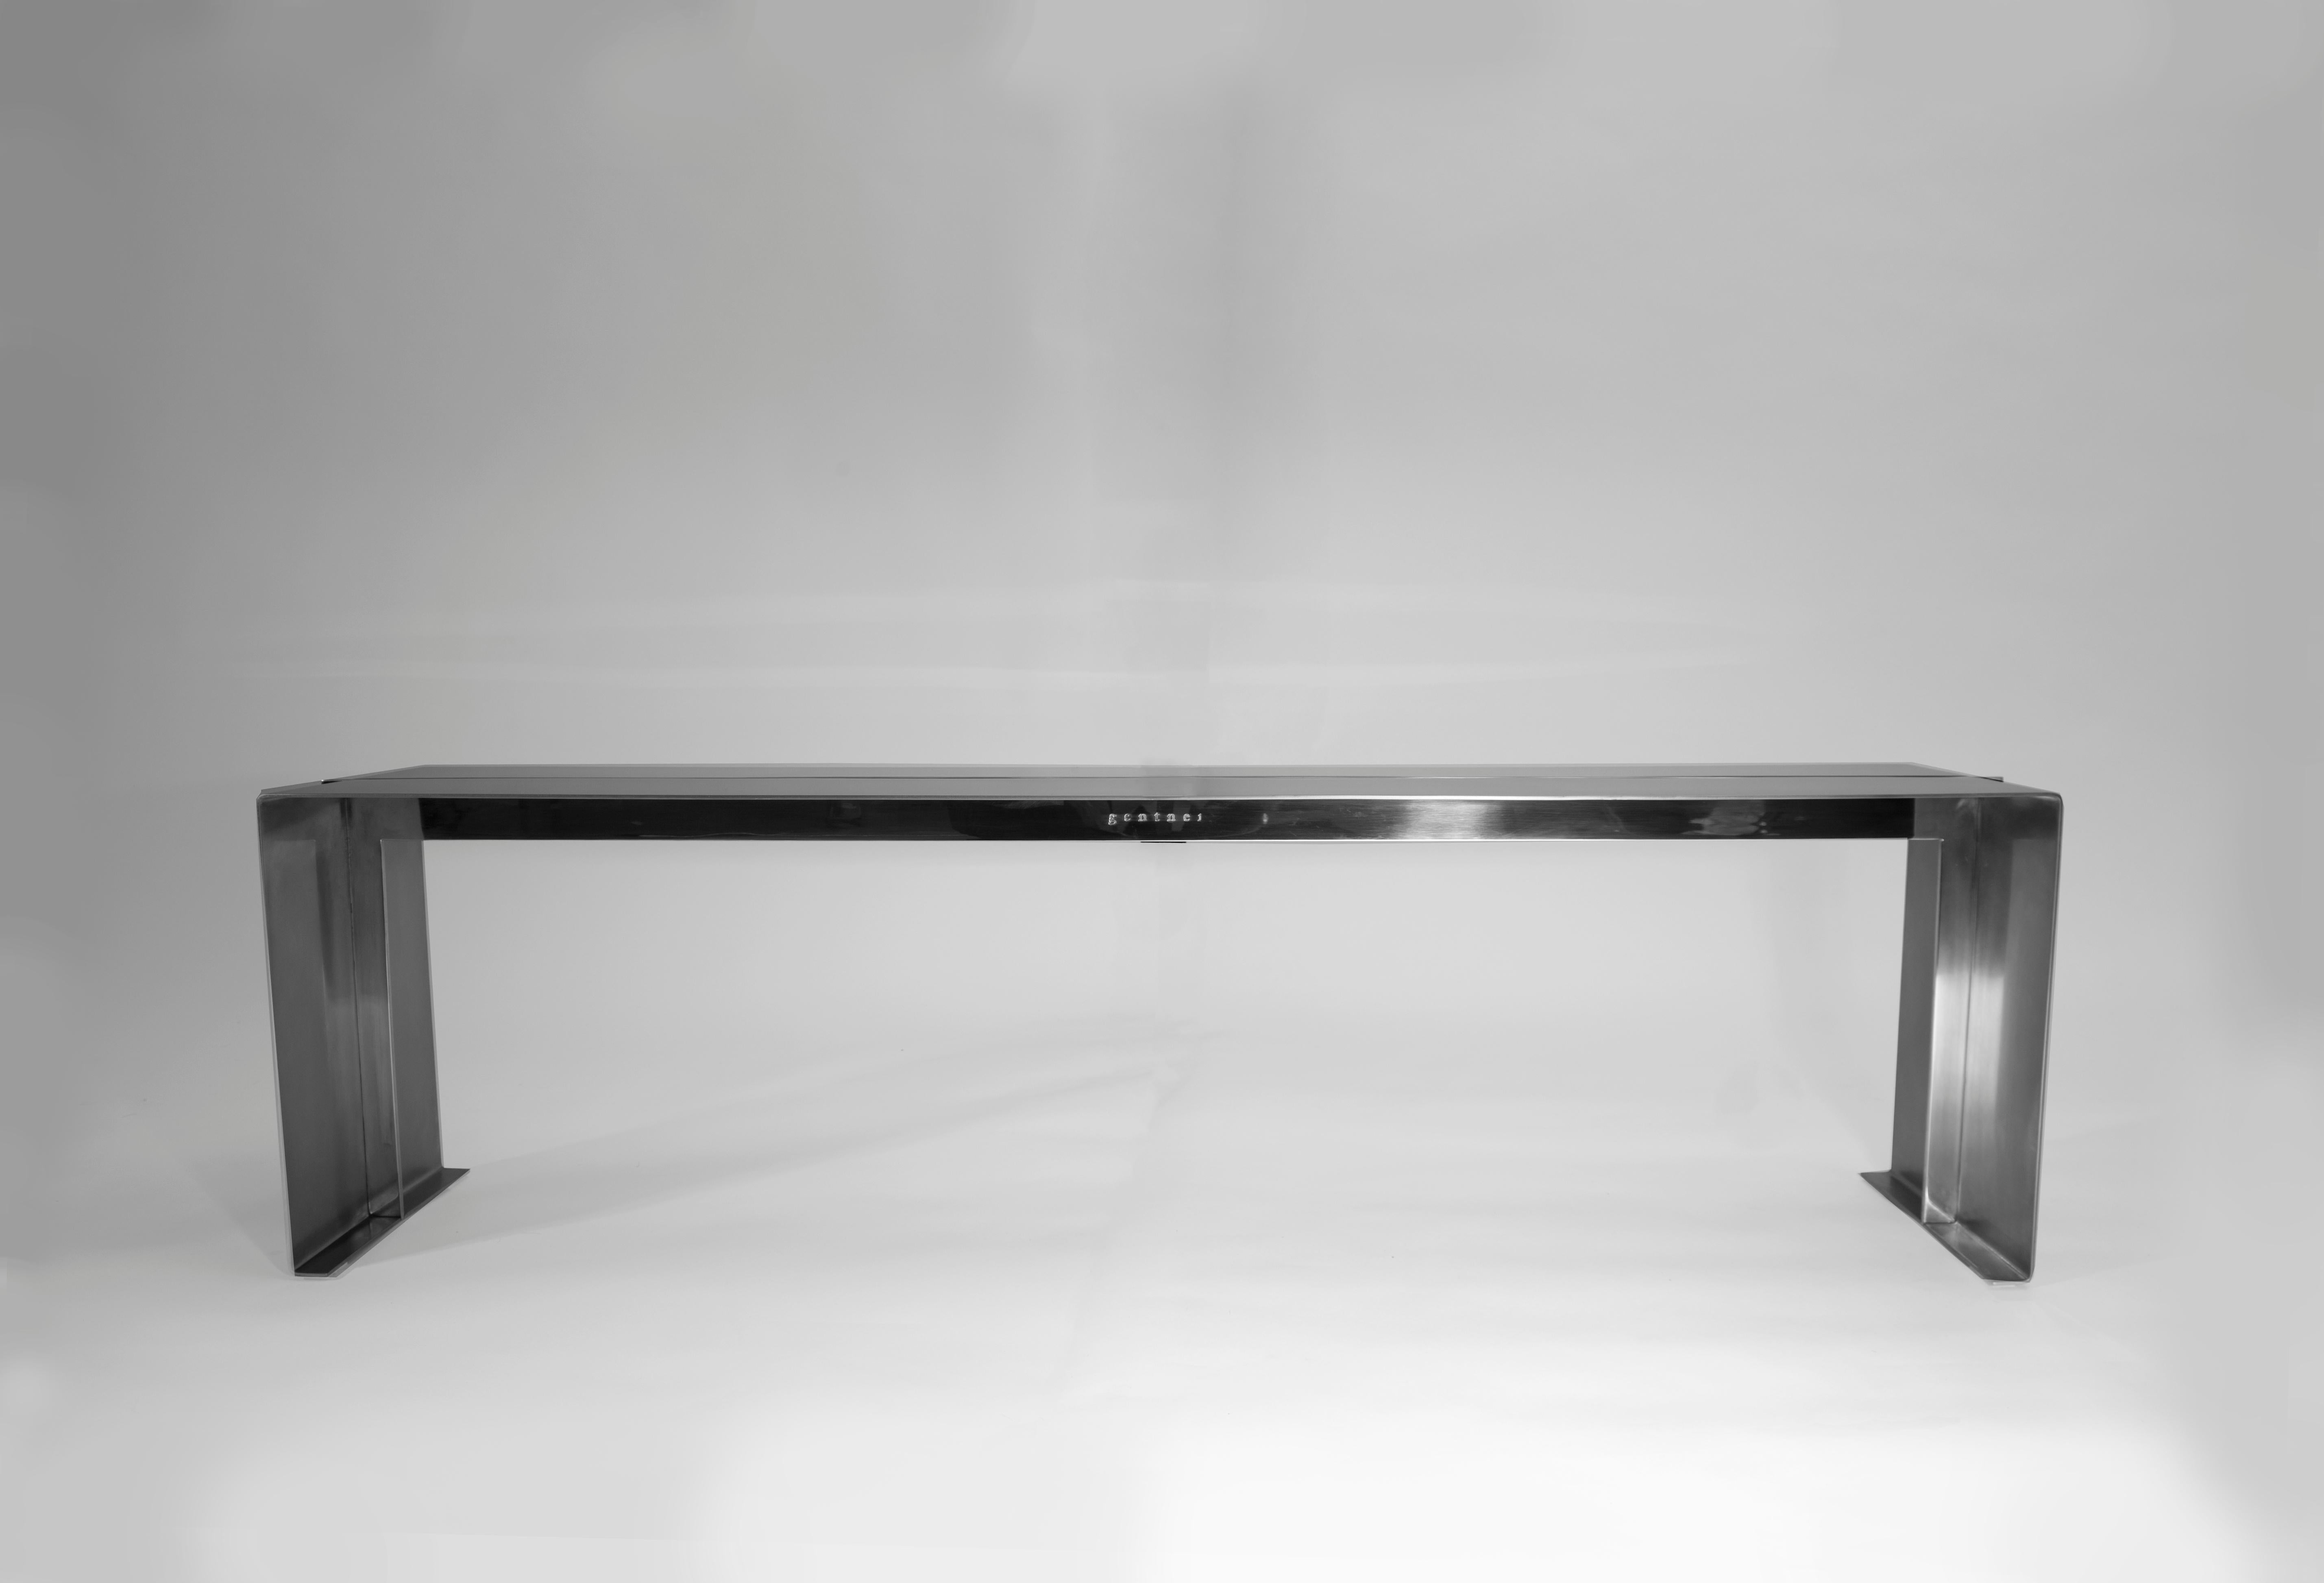 Bond bench by Gentner Design
Dimensions: D 152 x W 35.5 x H 45.7 cm
Materials: stainless steel

A subtle mix of polished and brushed stainless steel, this bench is about attention to detail. The simple T-shape structure is simplicity at its best